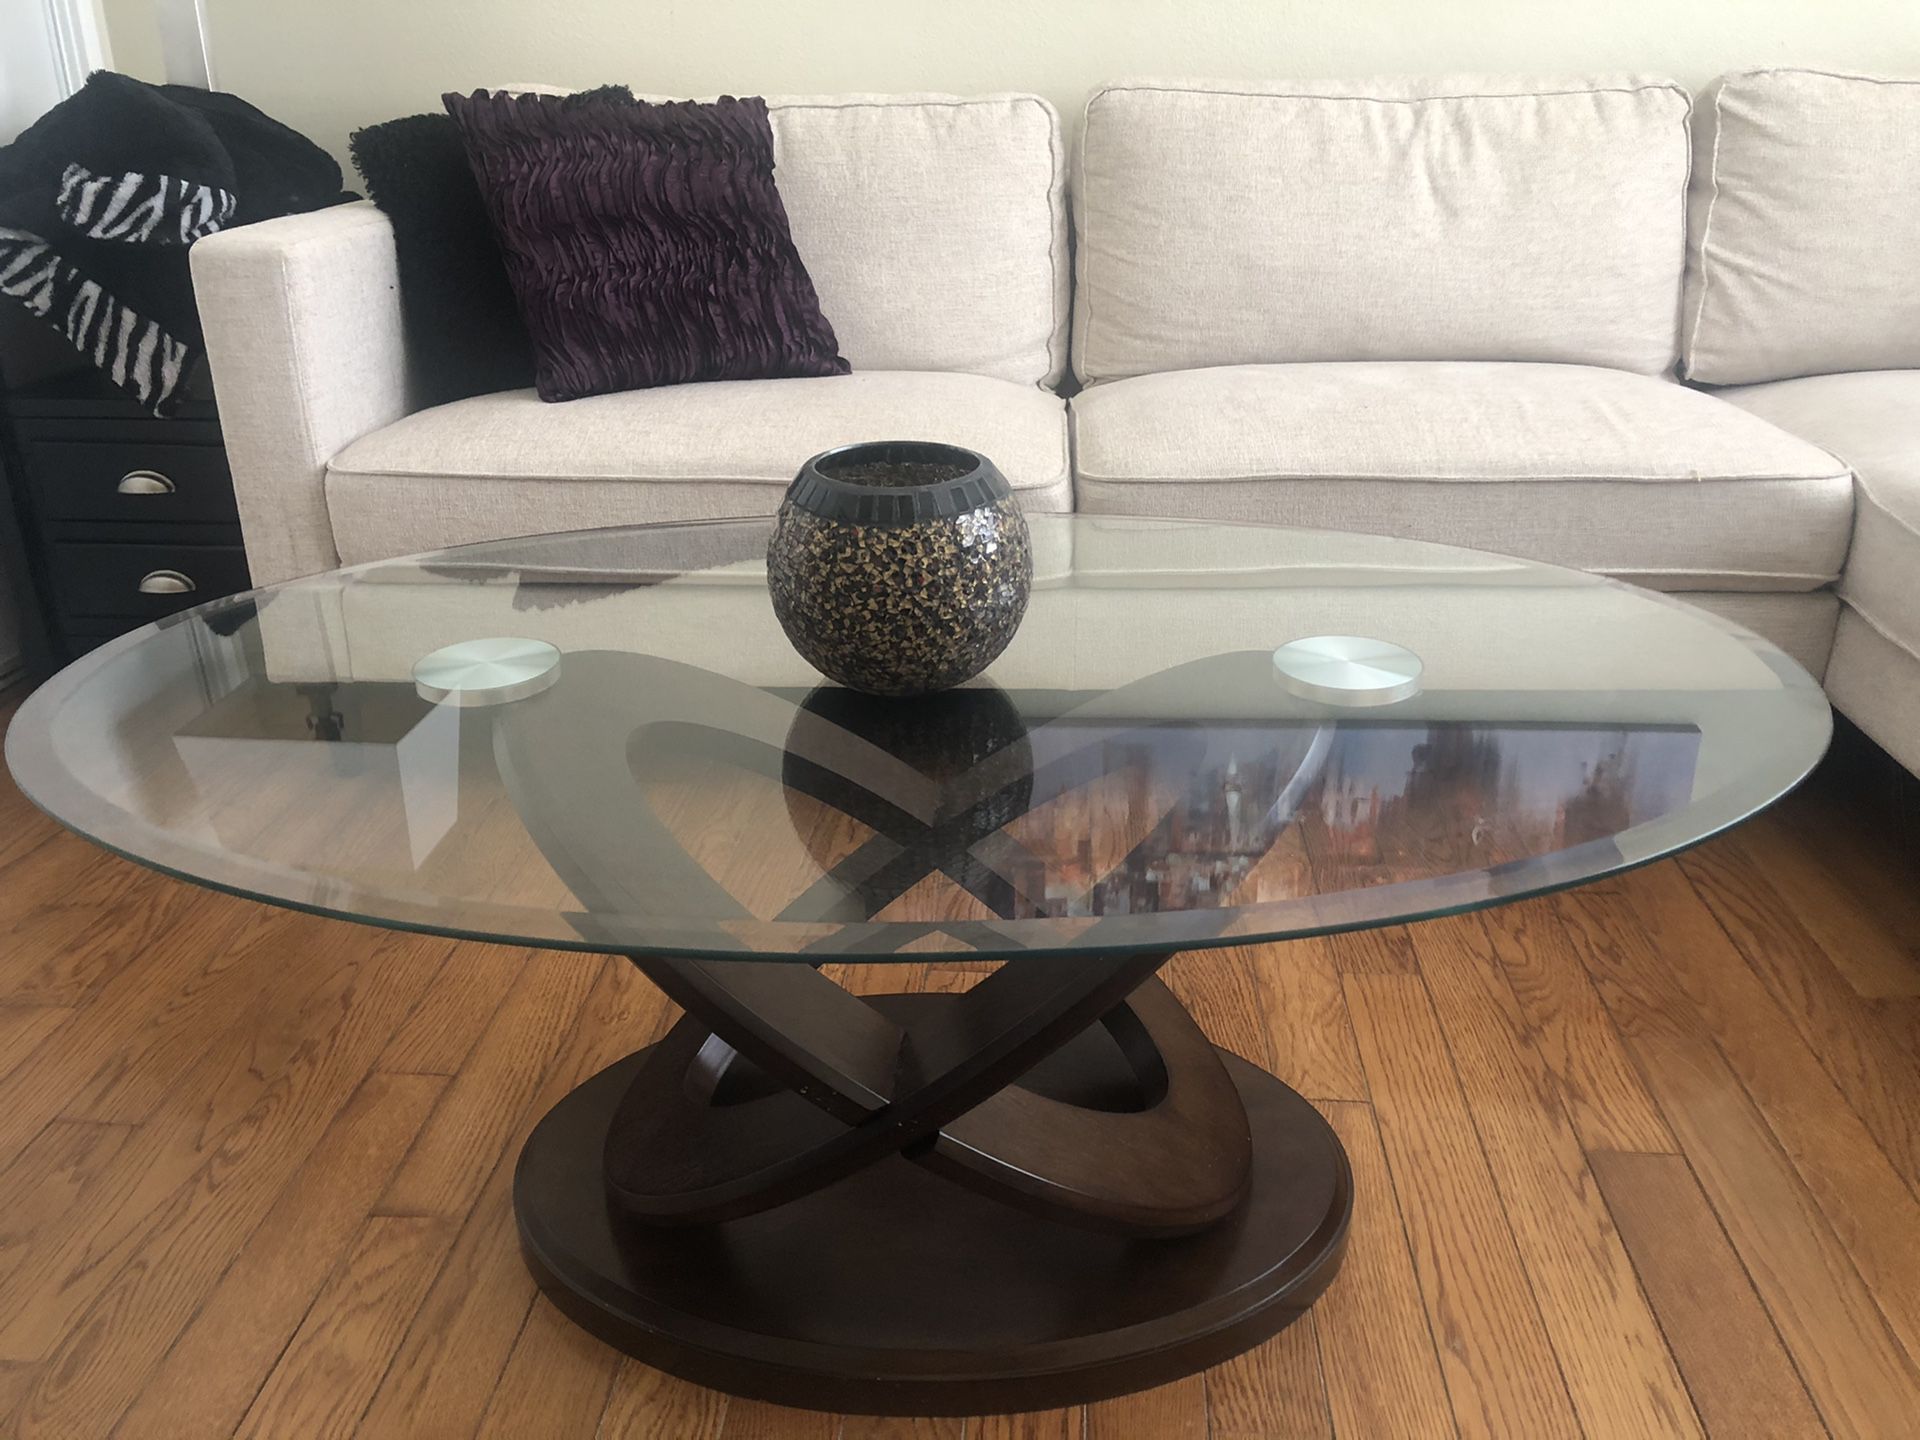 End table and coffee table combo